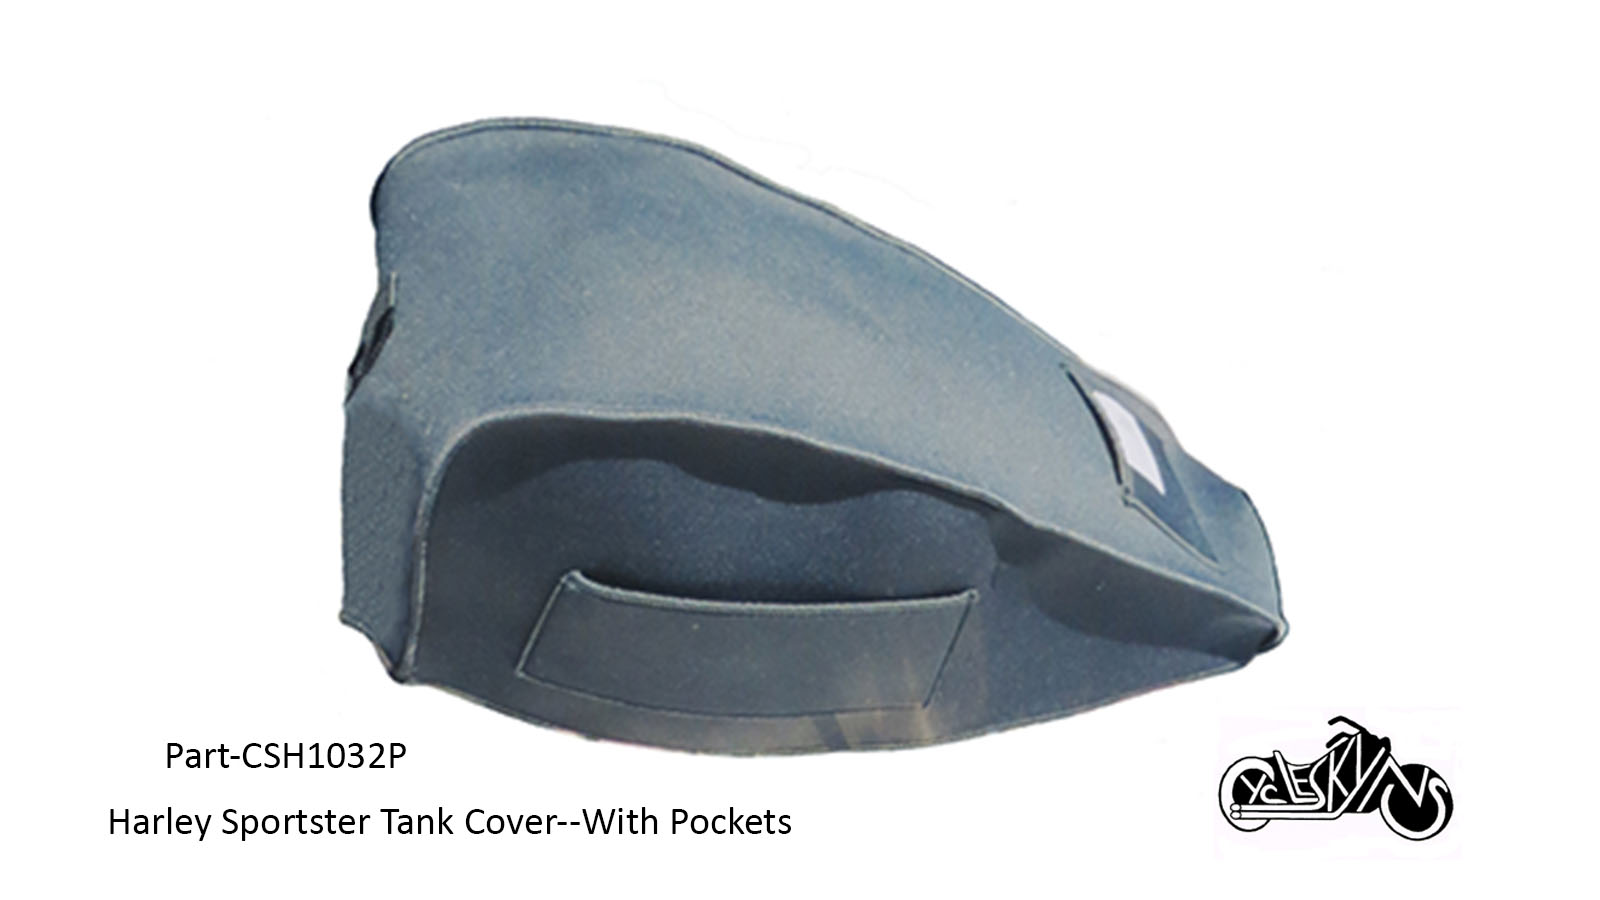 Neoprene Protective mechanic's Cover designed for the original 3.2 gallon Sportster Harley Davidson gas tank without top or side pockets.